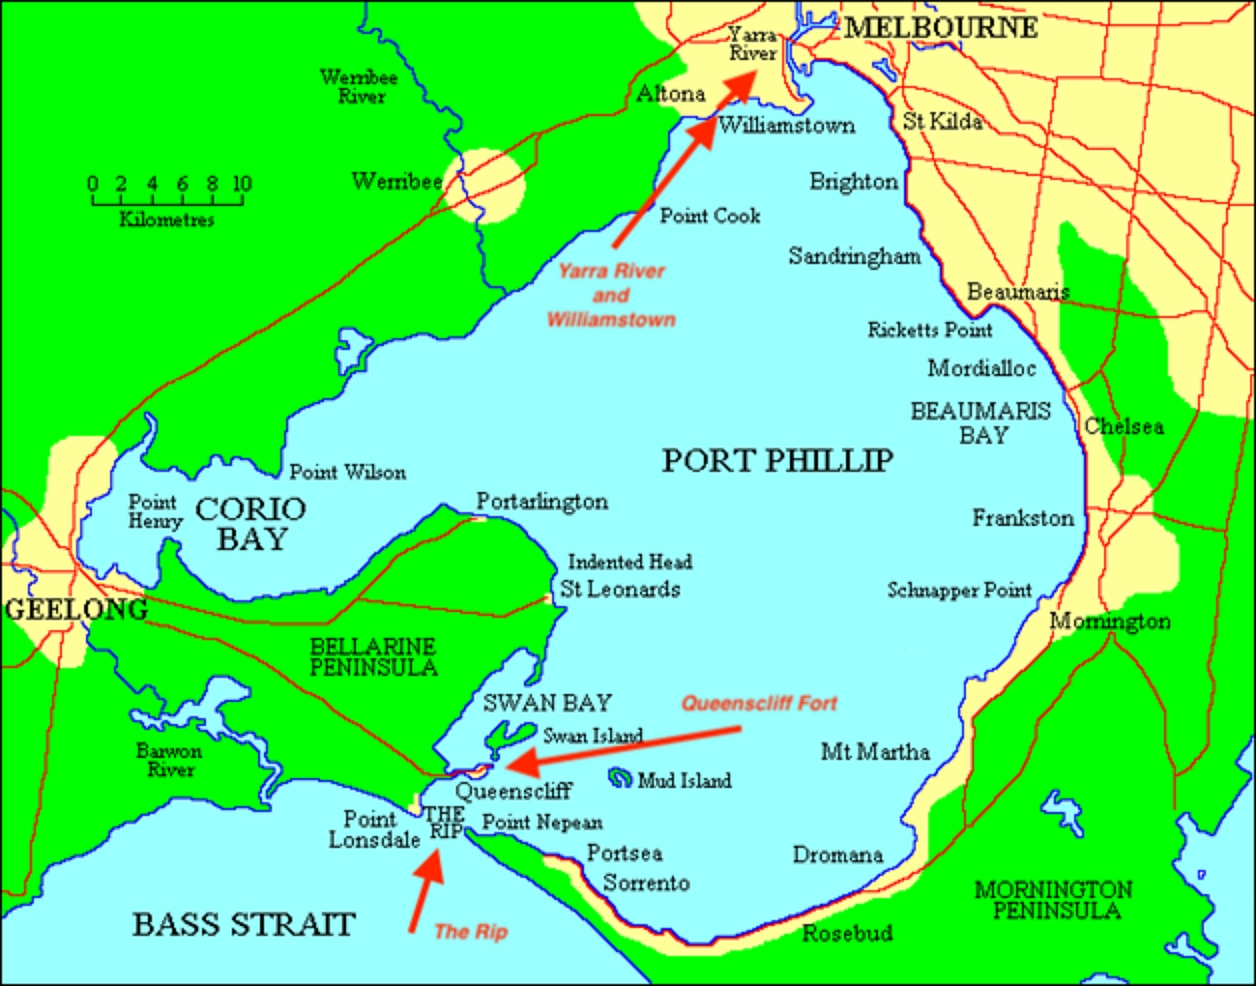 Port Phillip, Queenscliff Fort and The Rip